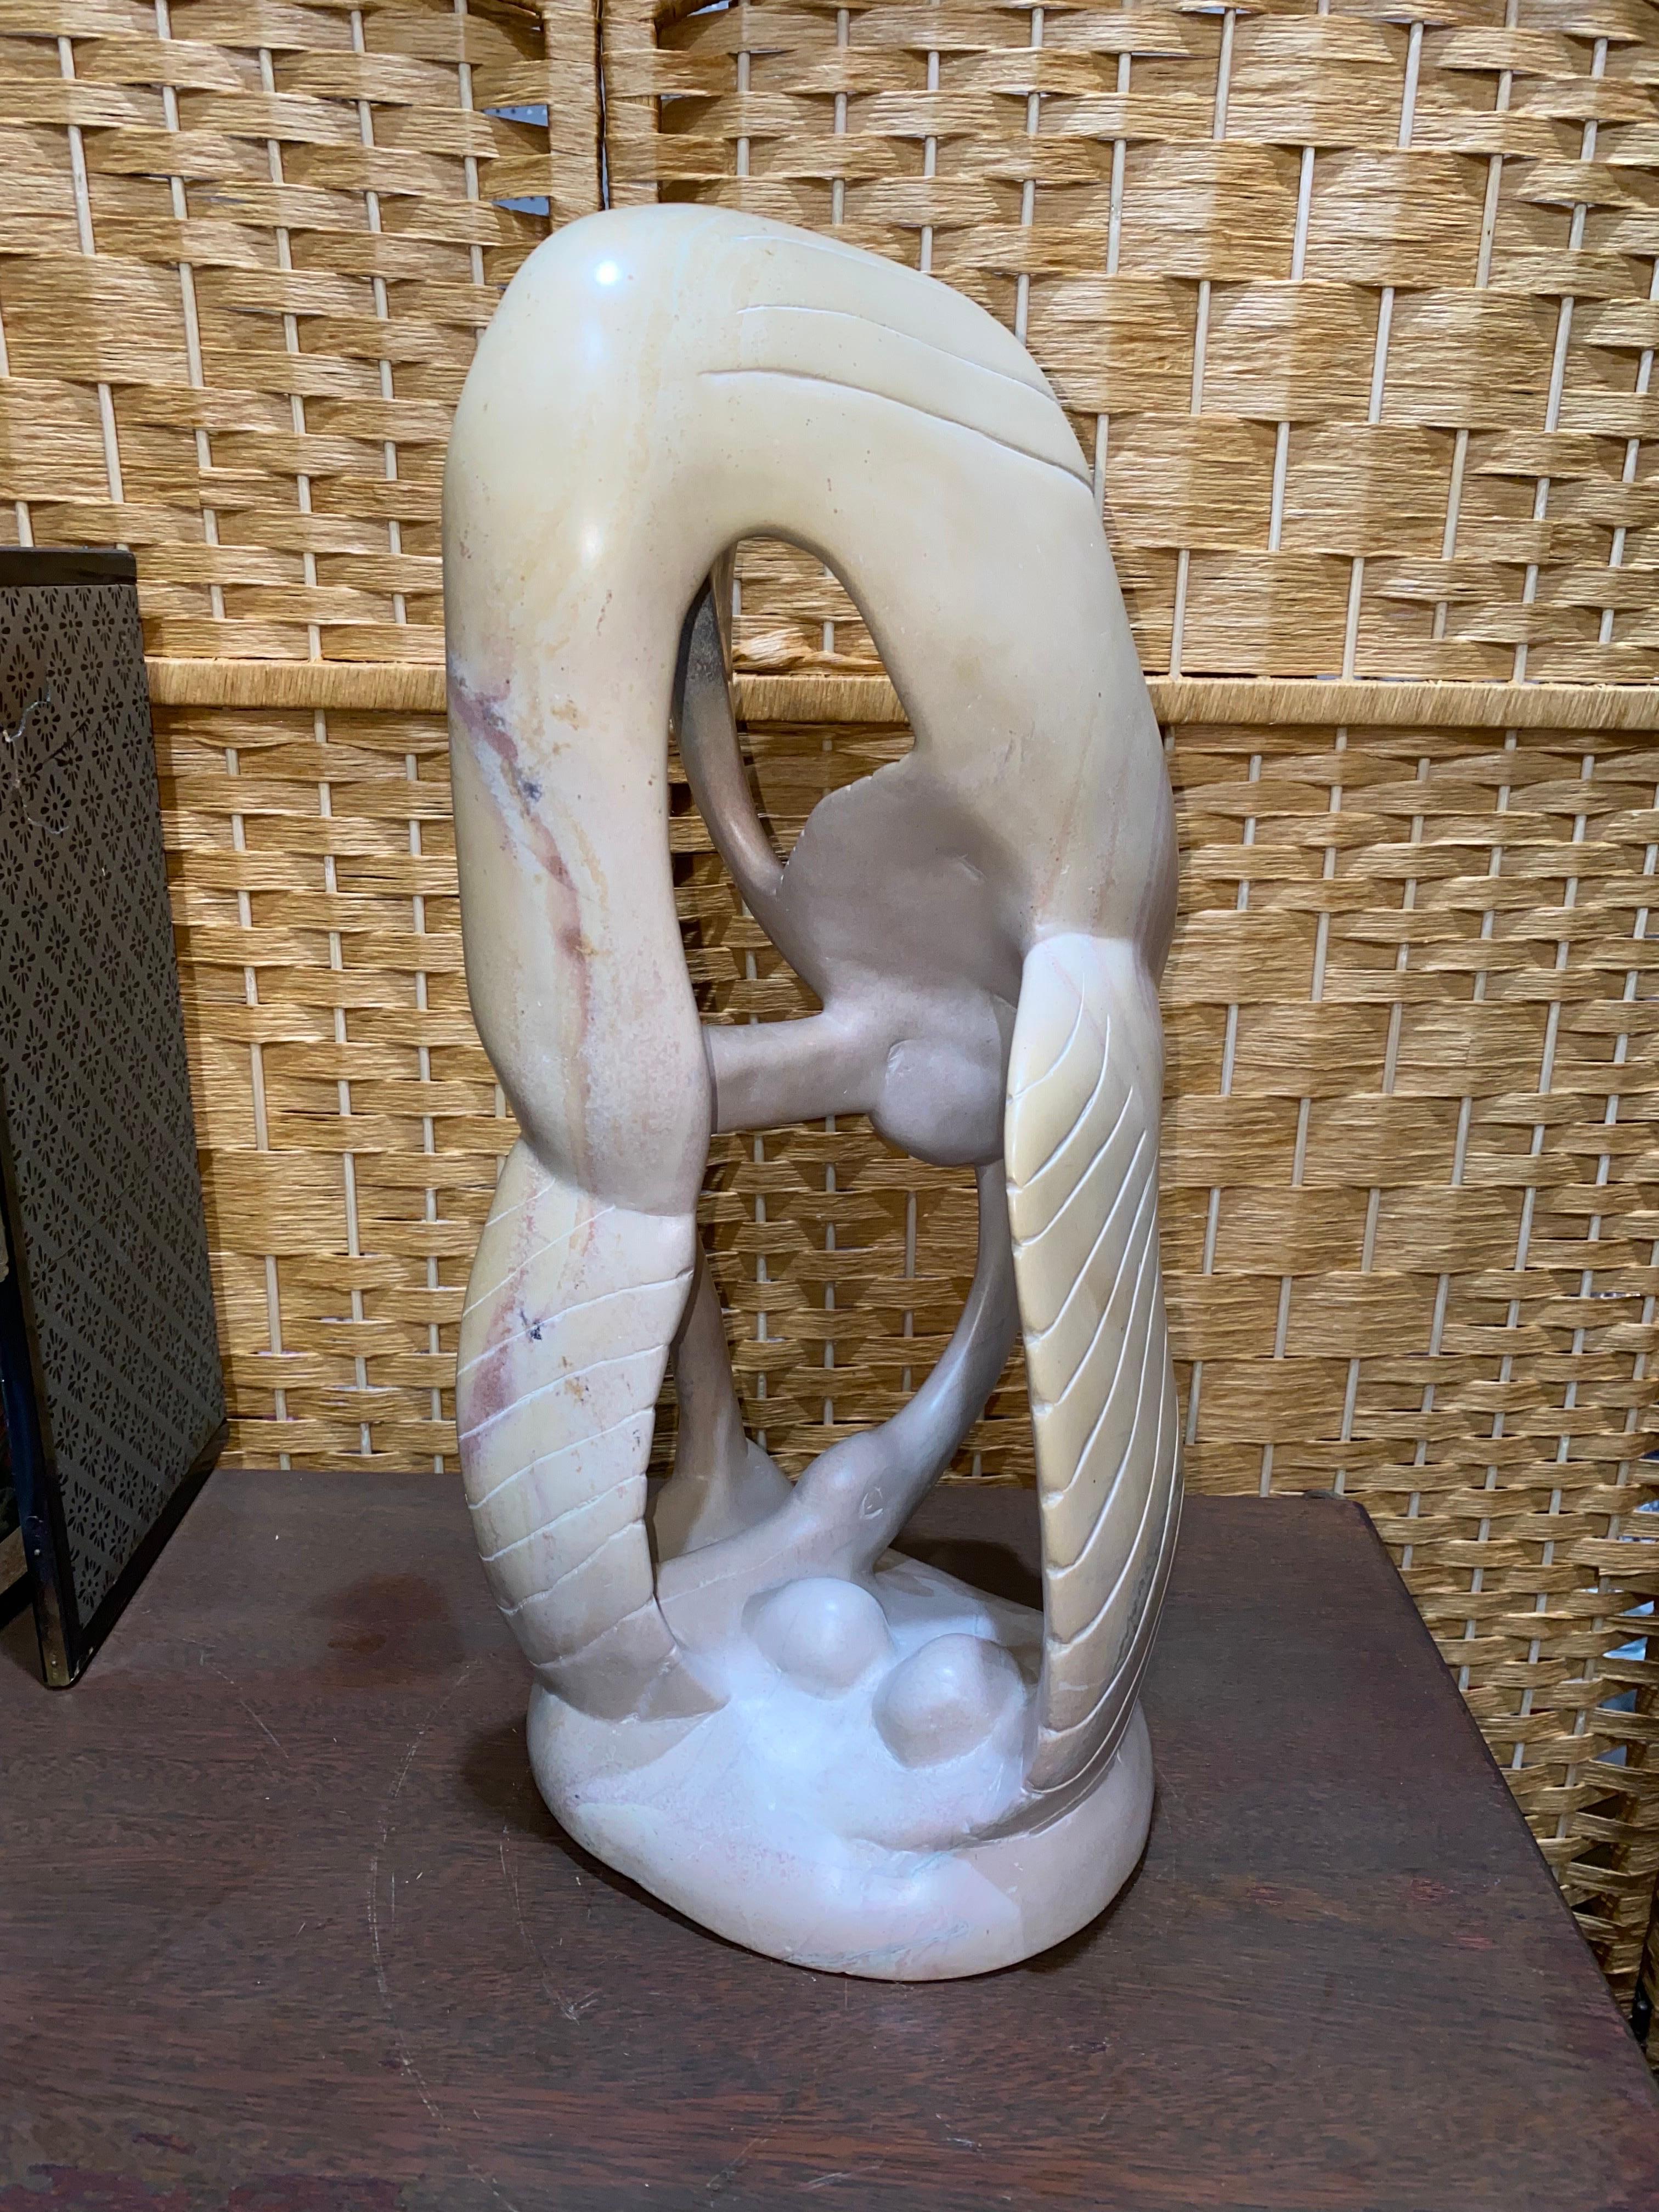 Beautiful 1980s abstract soapstone sculpture depicting a flamingo or other bird. An absolutely stunning eye-catcher wherever displayed. 

In excellent condition. See pictures for details.